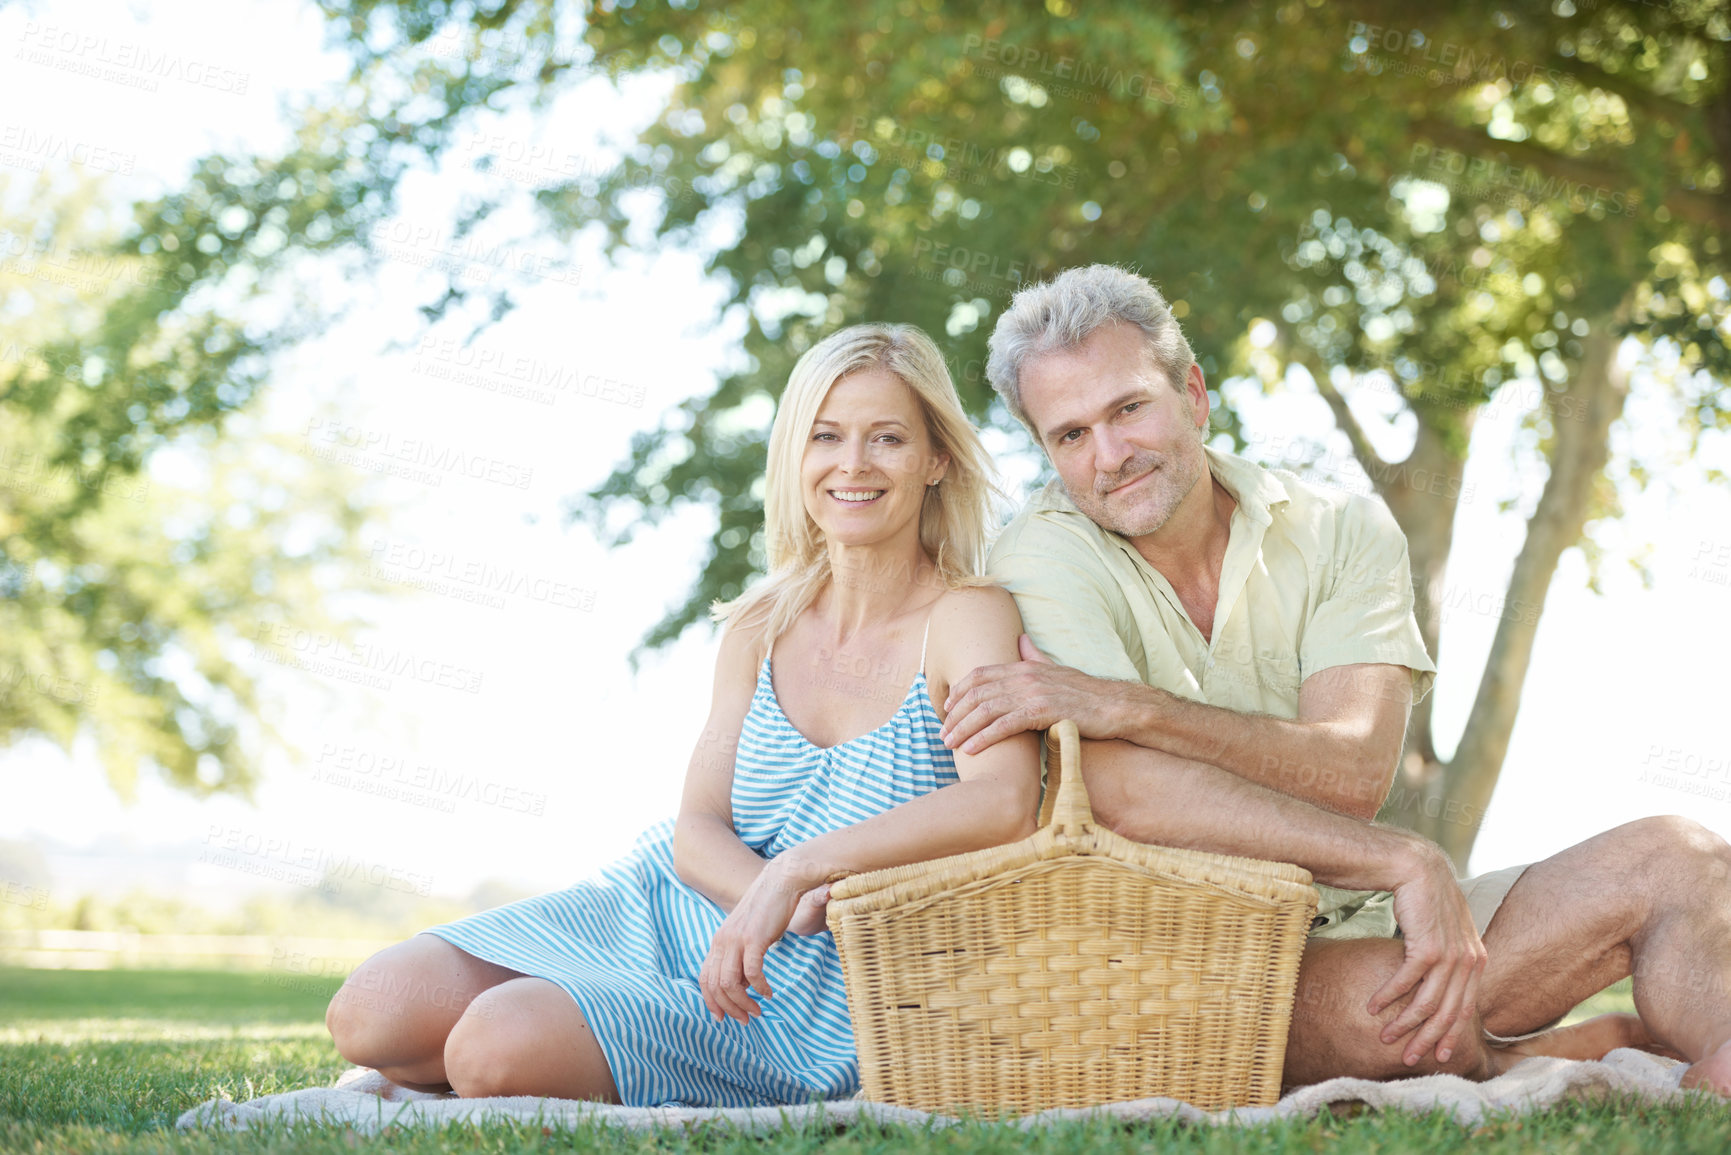 Buy stock photo A happy husband and wife sitting in a park with a picnic basket